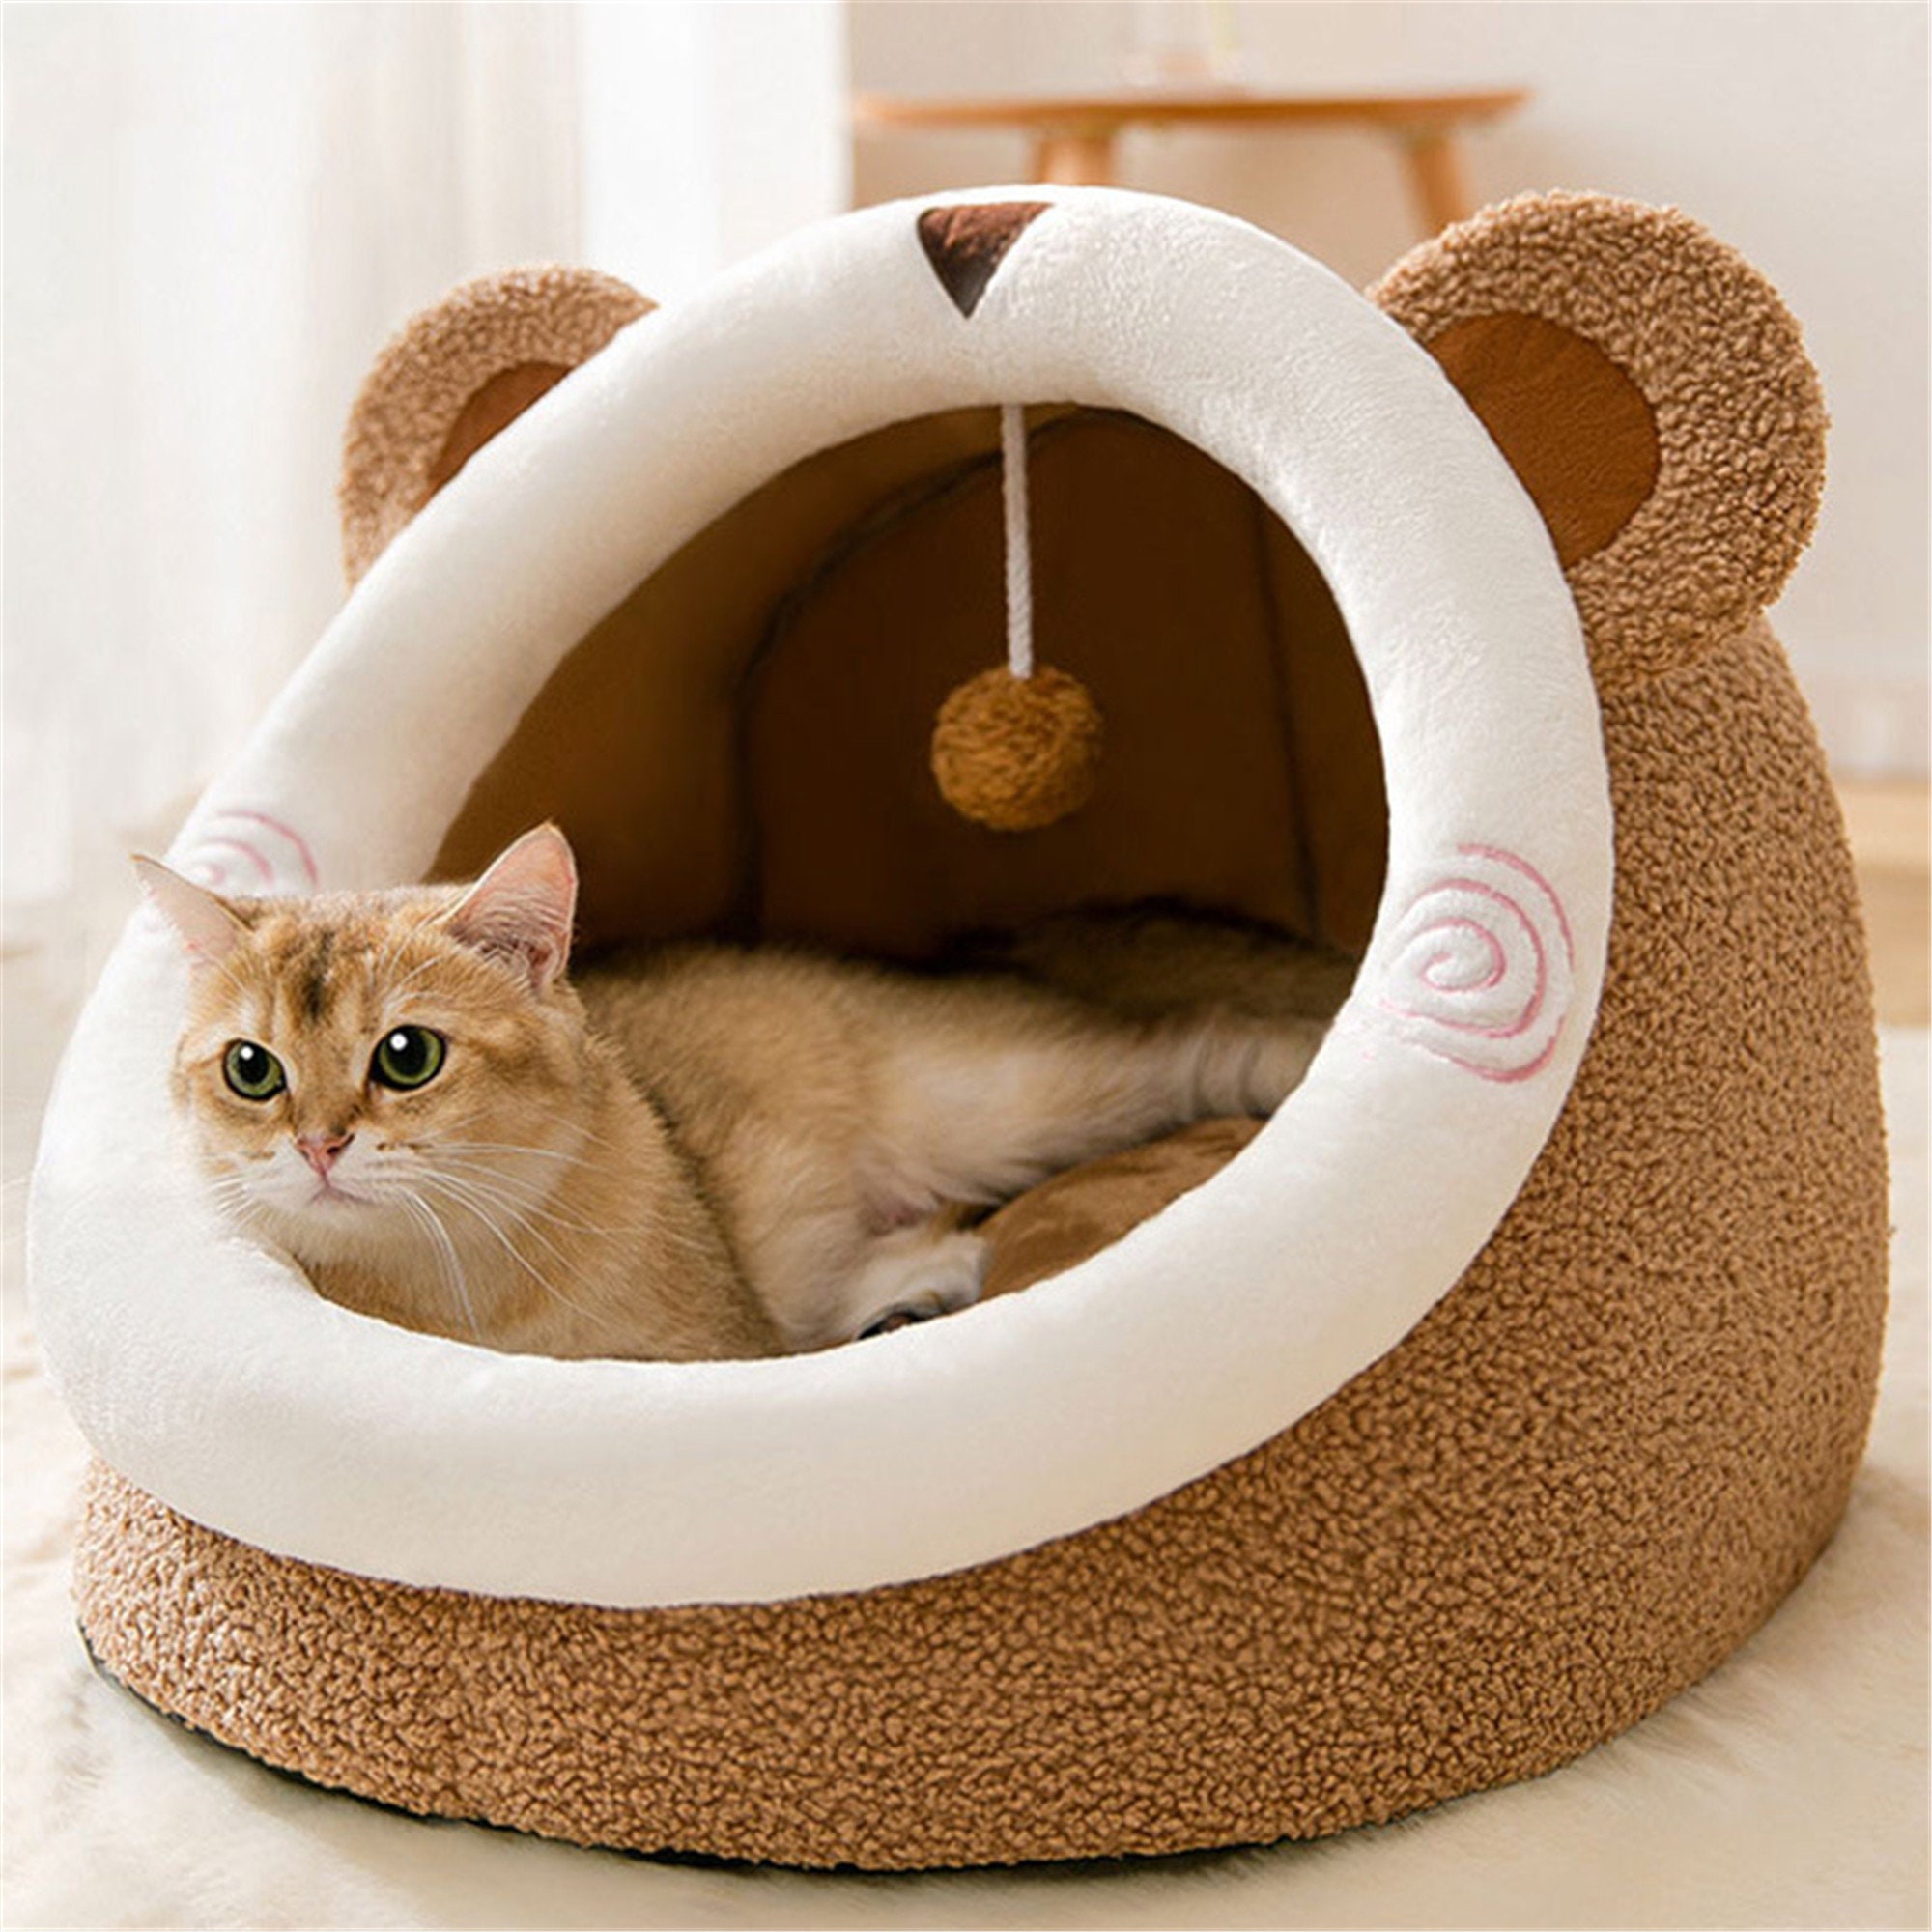 Iconic Pet Sassy Paws Multipurpose Wooden Pet Bed with Feeder for